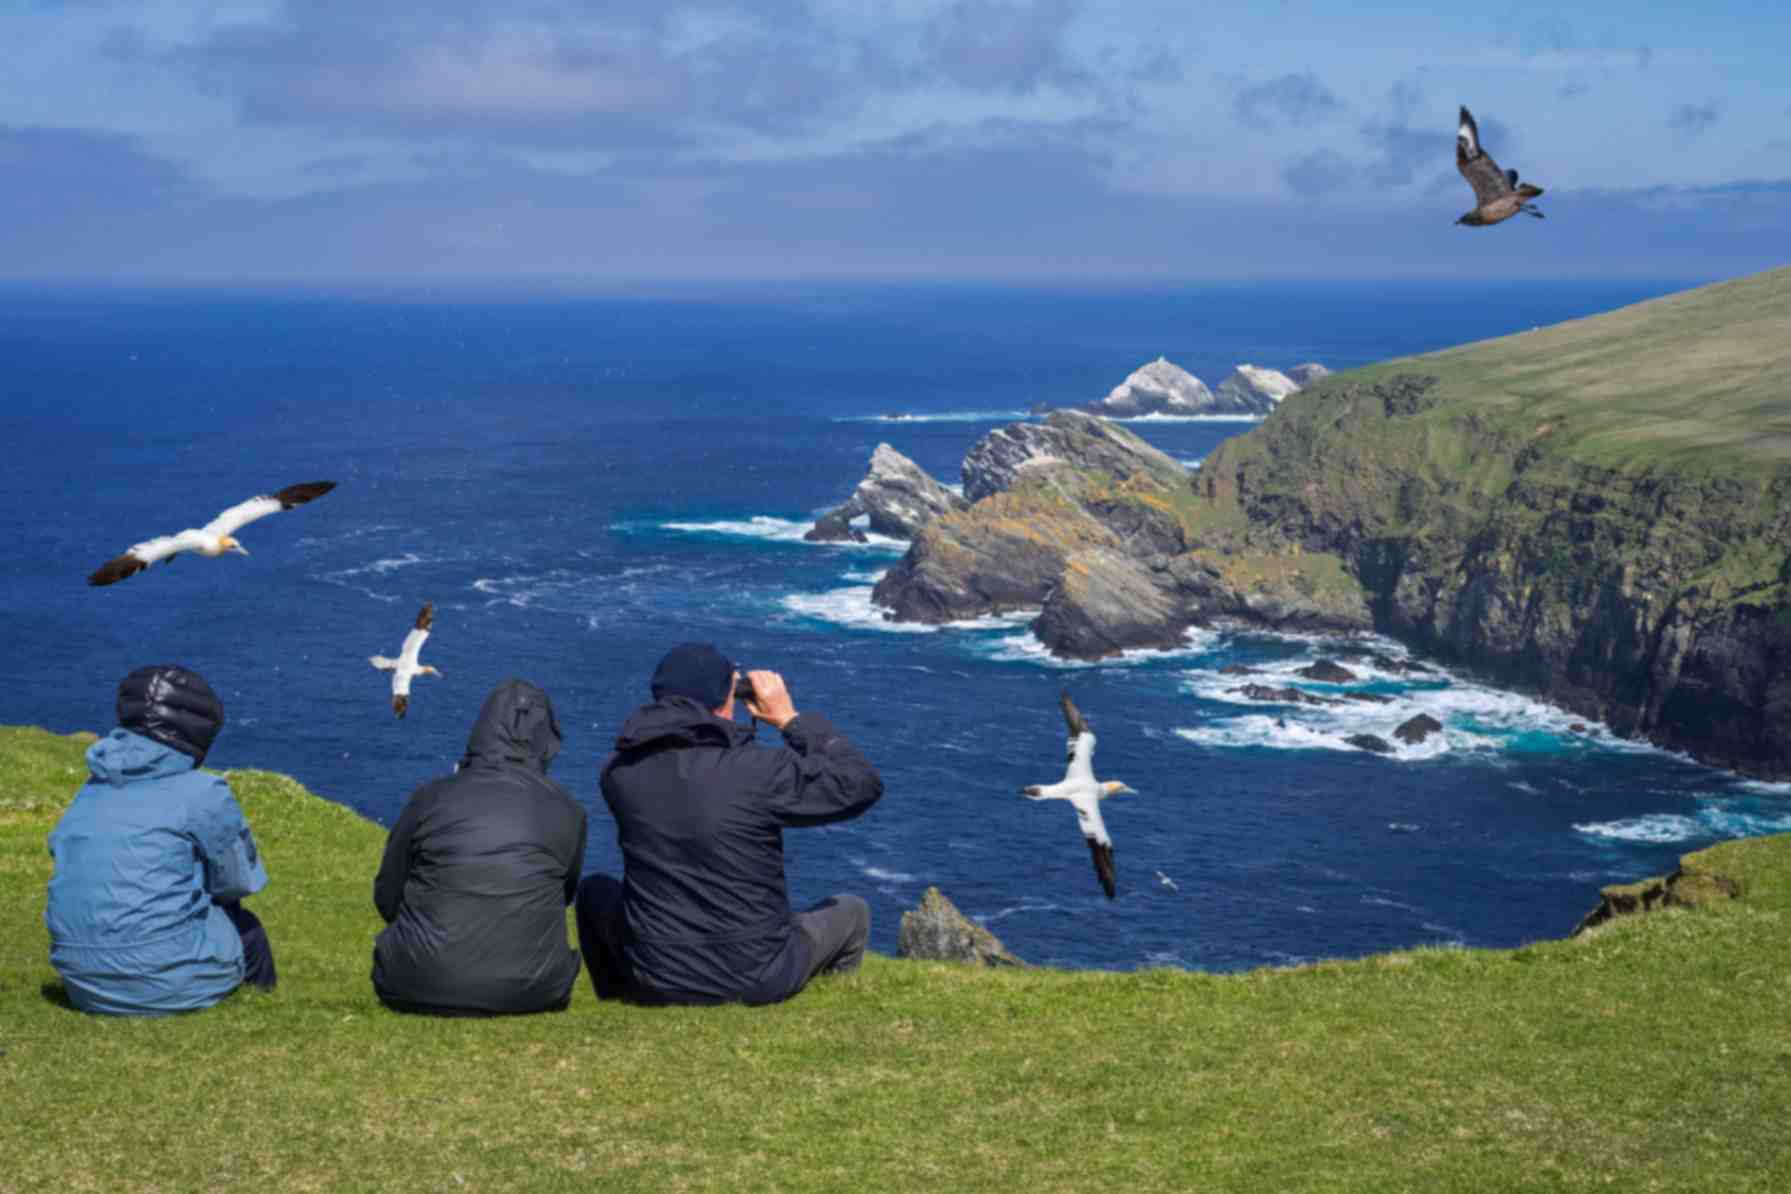 People sitting on a cliff watching birds flying over the ocean